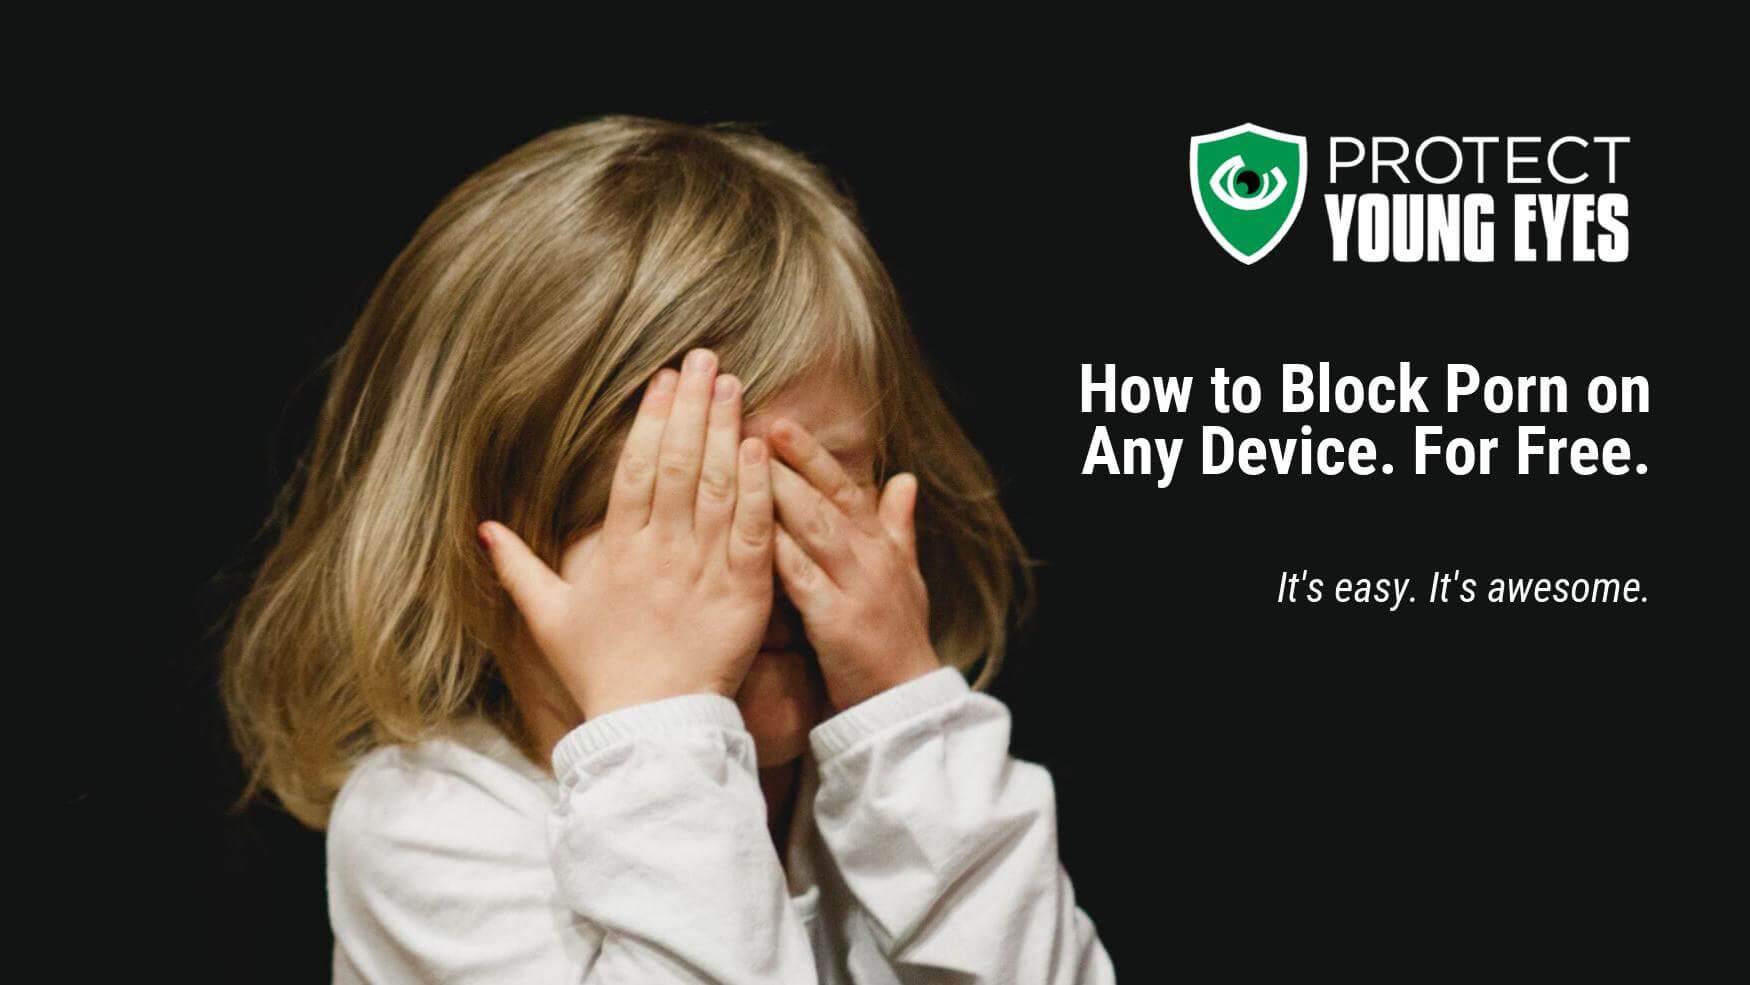 Uc Browser Xnxx Com - How to Block Porn on Any Device. For Free. A Protect Young Eyes Post.